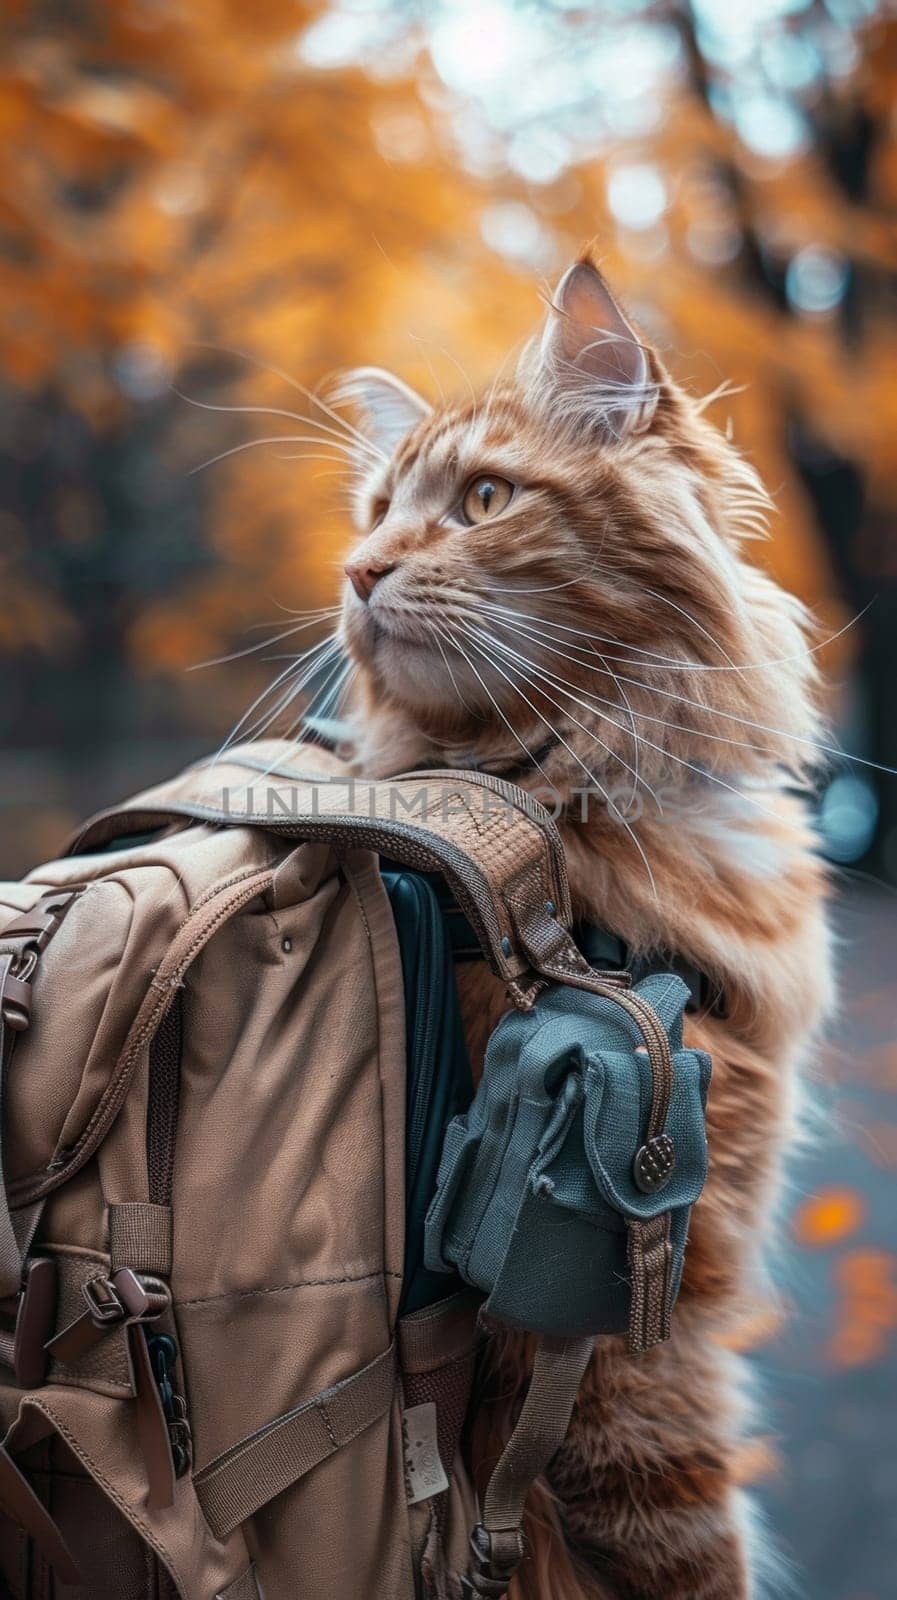 A cat with a backpack on its back looking up, AI by starush